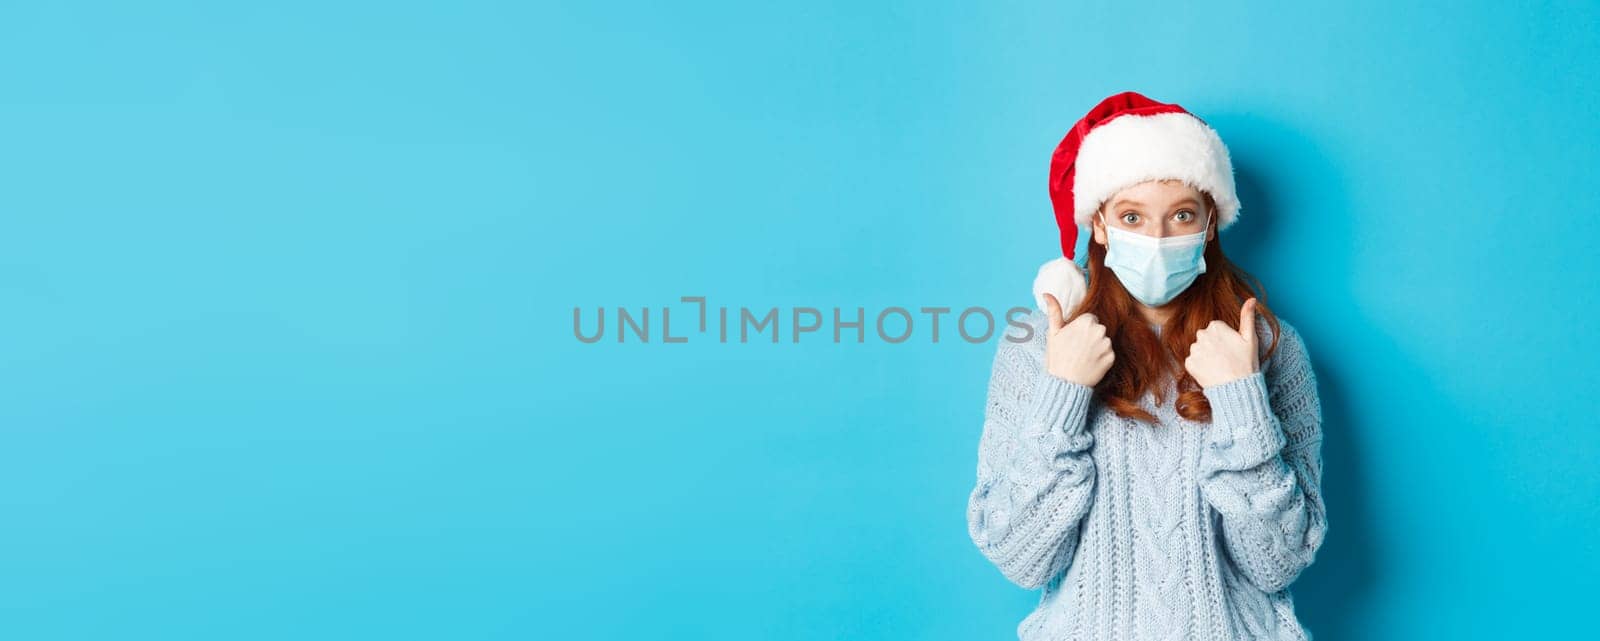 Christmas, quarantine and covid-19 concept. Cute teen redhead girl in santa hat and sweater, wearing face mask from coronavirus, showing thumbs up, standing over blue background.